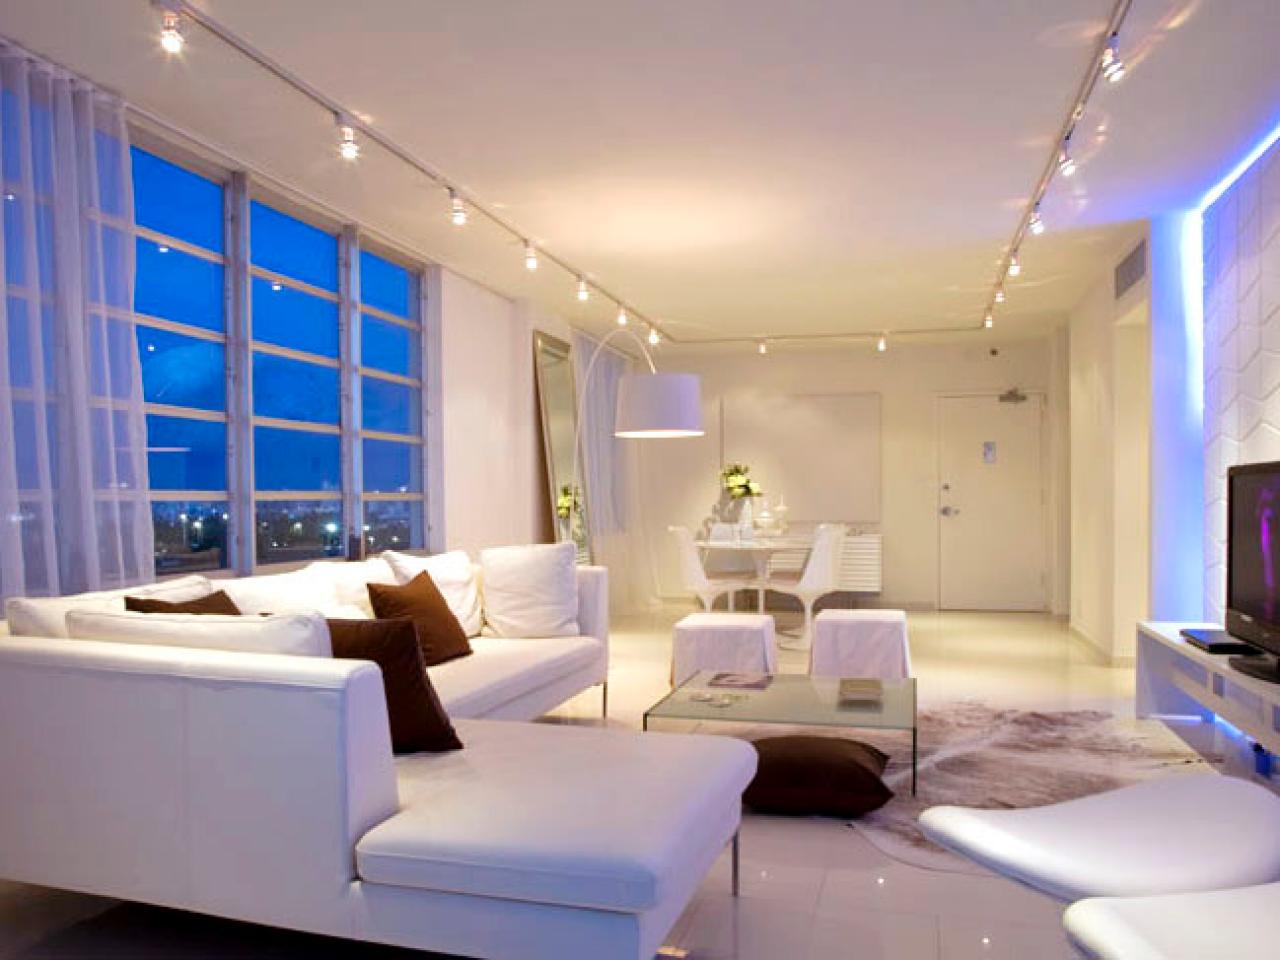 Living Room Lighting Tips Hgtv for The Awesome along with Attractive living room lighting pictures for Found Residence